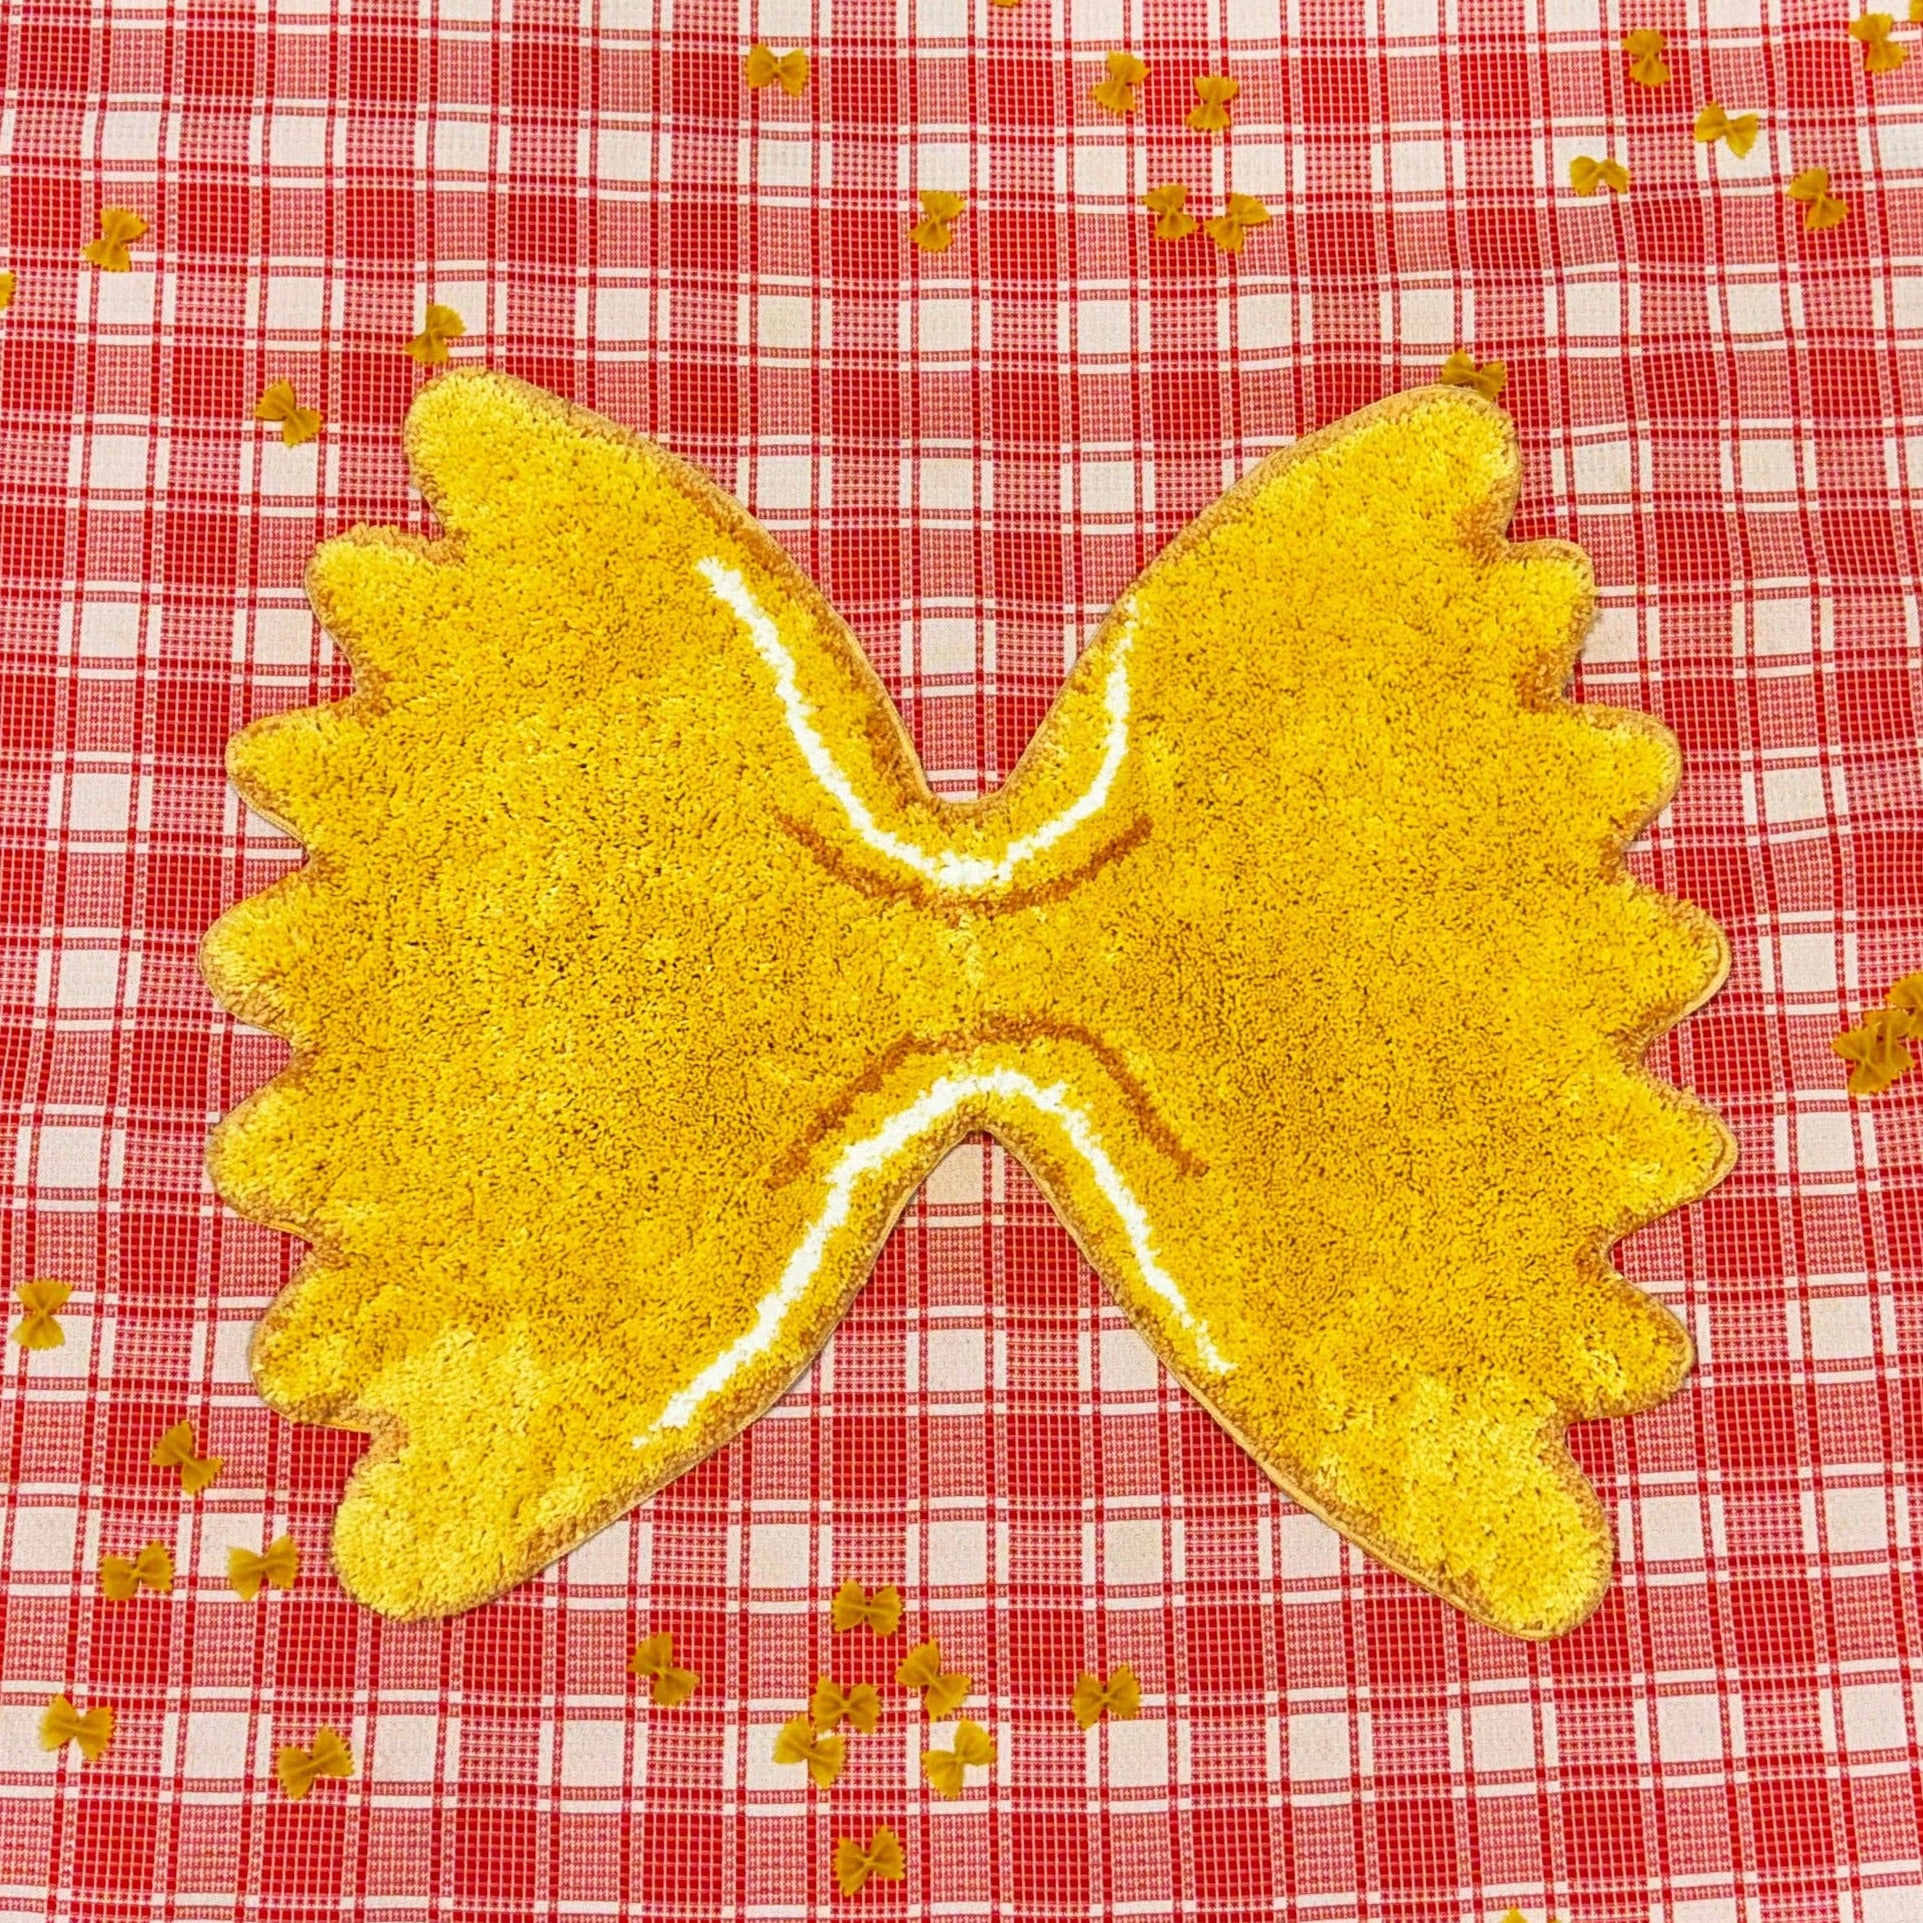 Rug in the shape of a farfalle (butterfly/bowtie) pasta